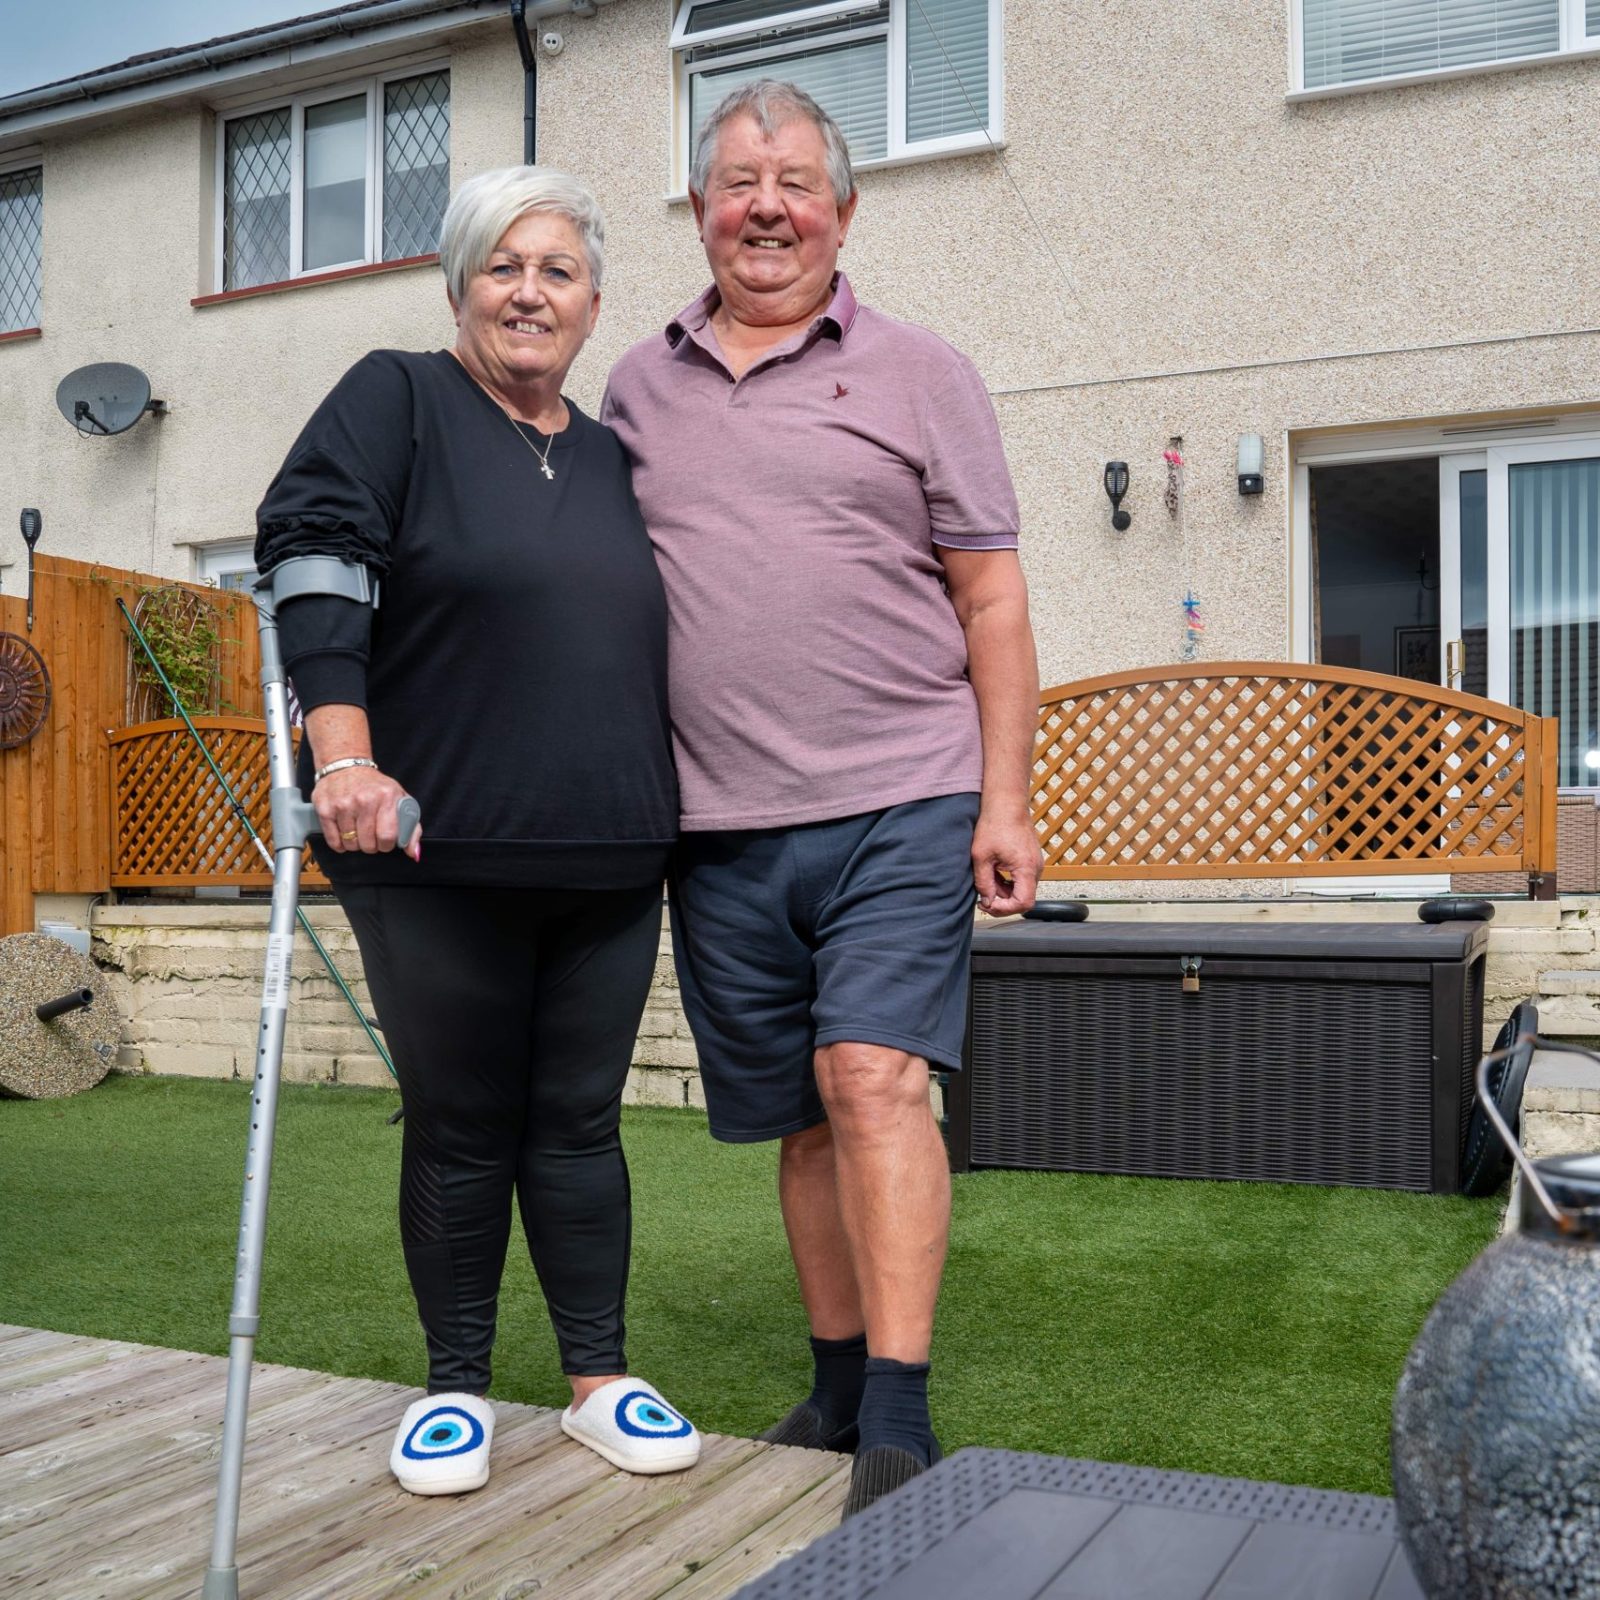 Trivallis Housing Landlord Wales A smiling couple stands together in the backyard of a Trivallis housing residential home, with the woman holding onto a cane and a man with his arm around her.